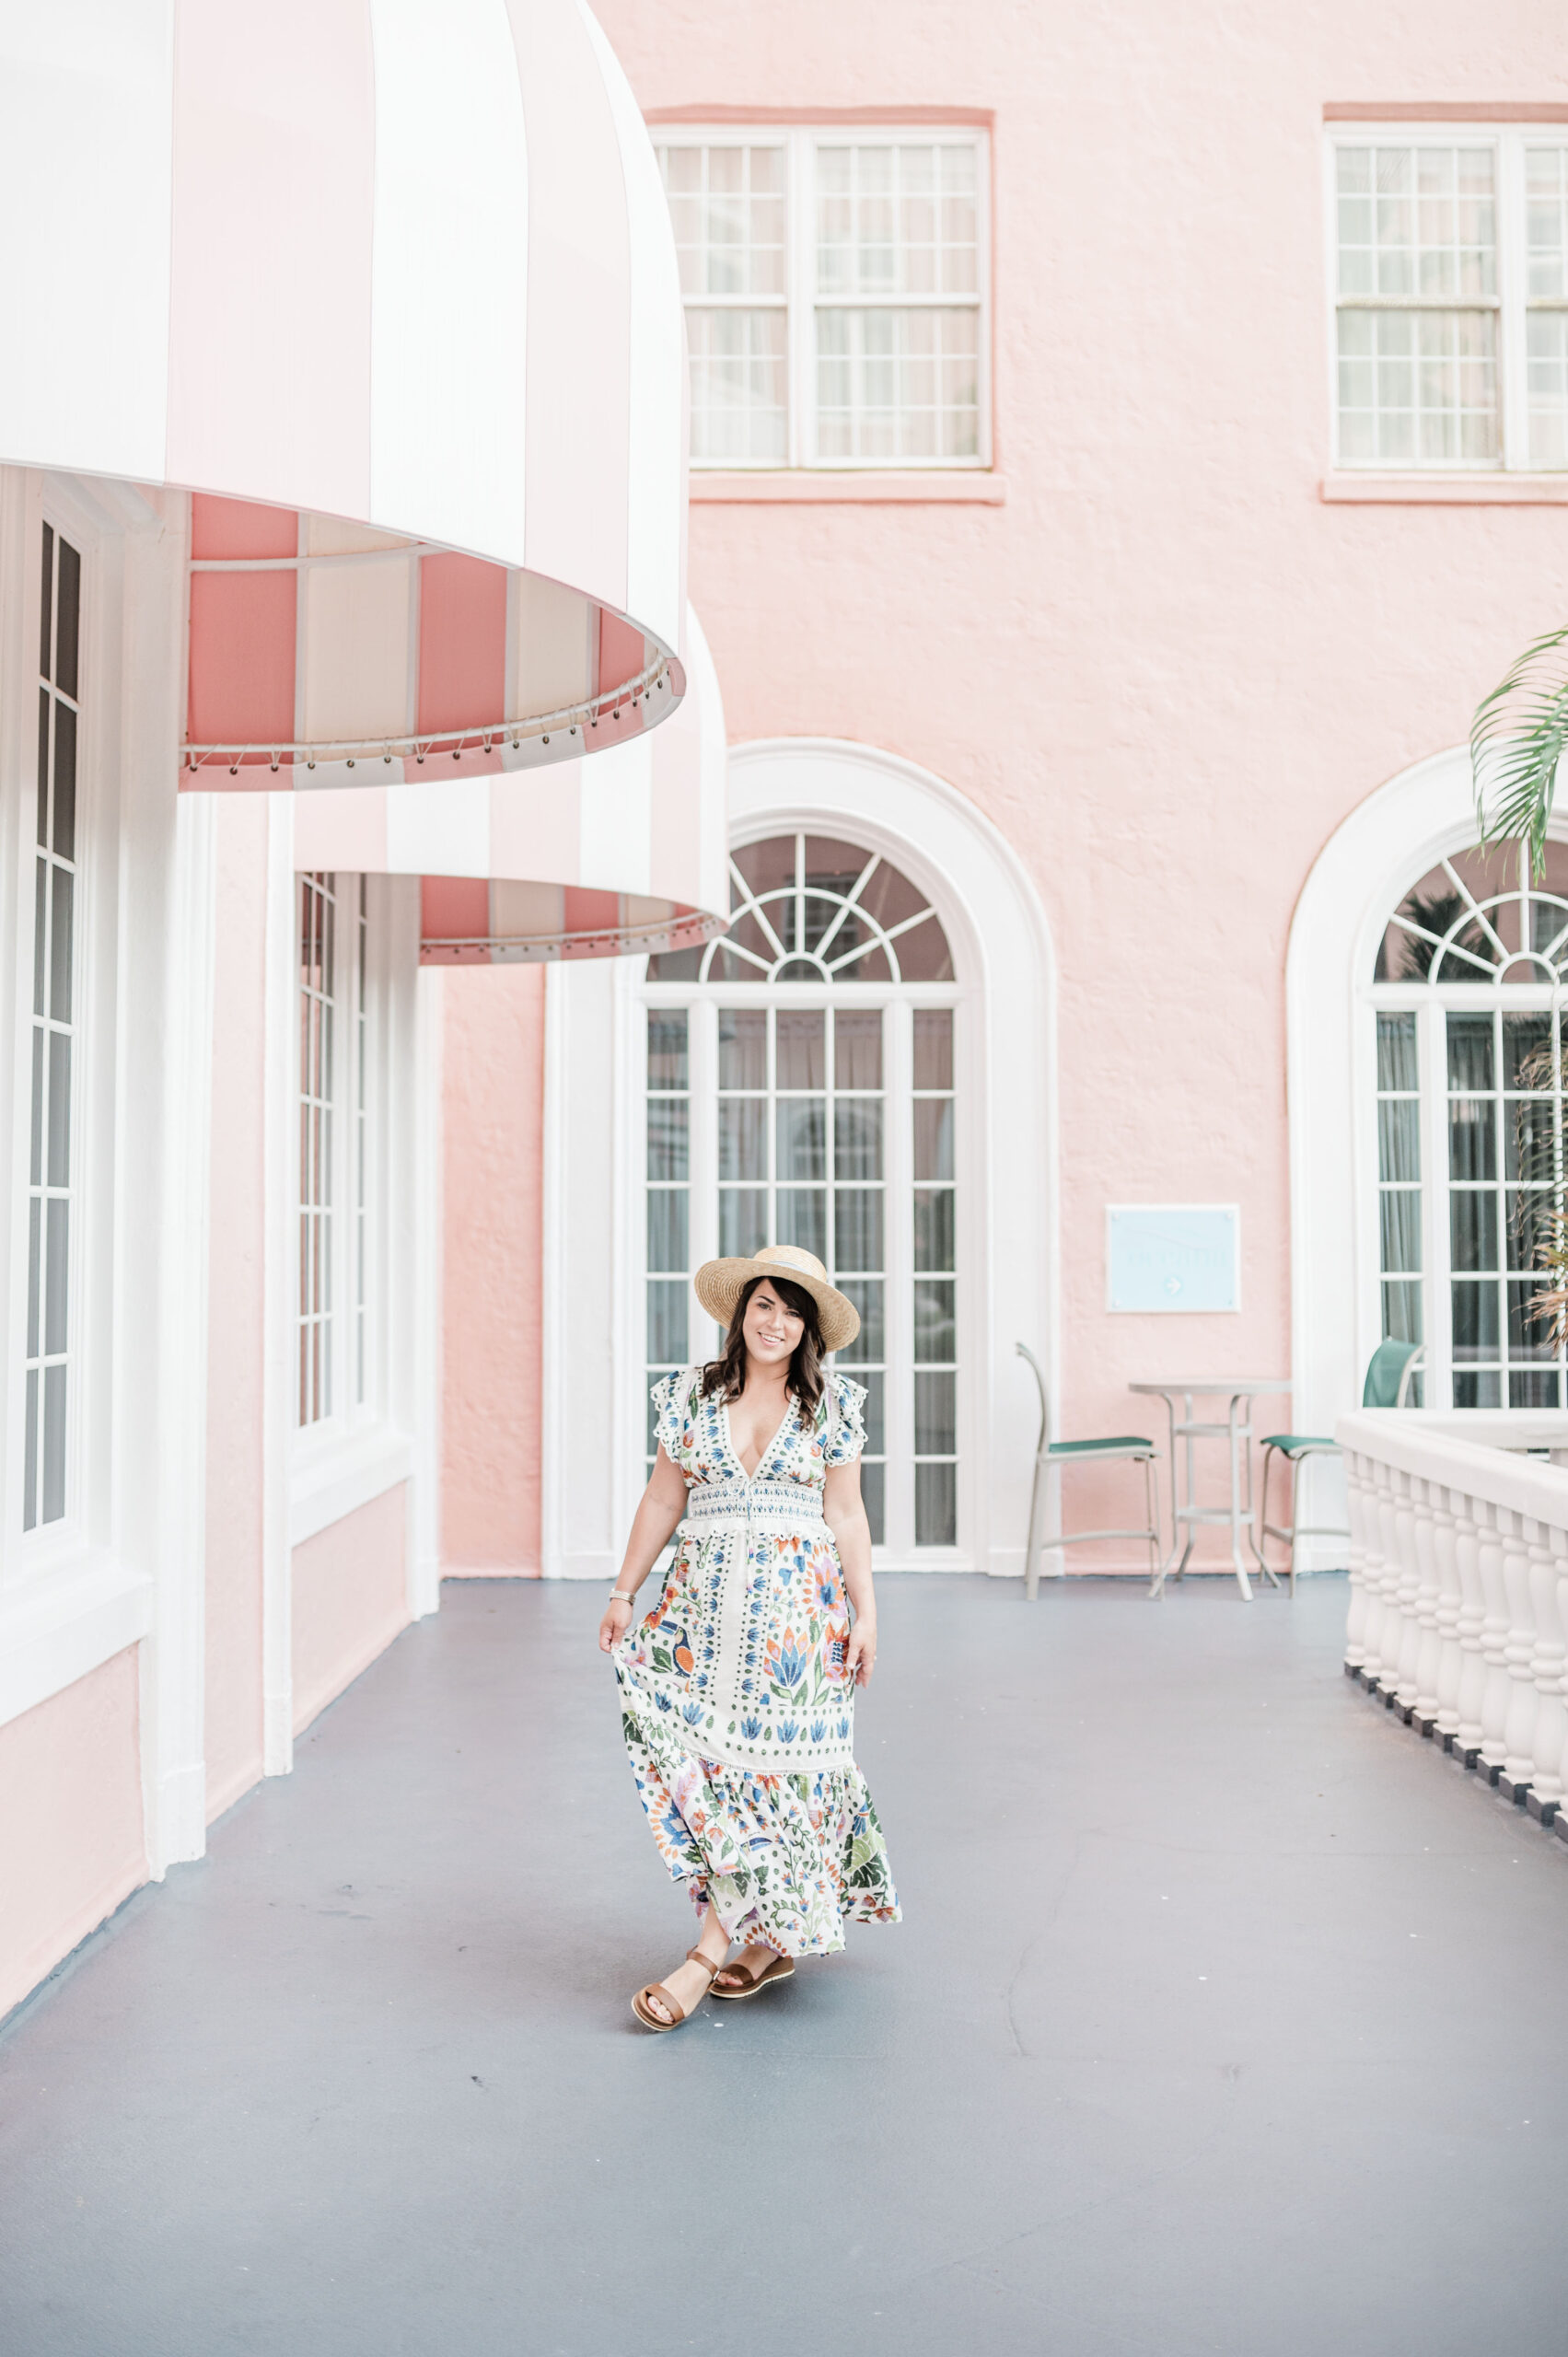 Brittney Naylorwearing Farm Rio maxi dress waving bottom of dress standing under pink and white awnings at the pink palace